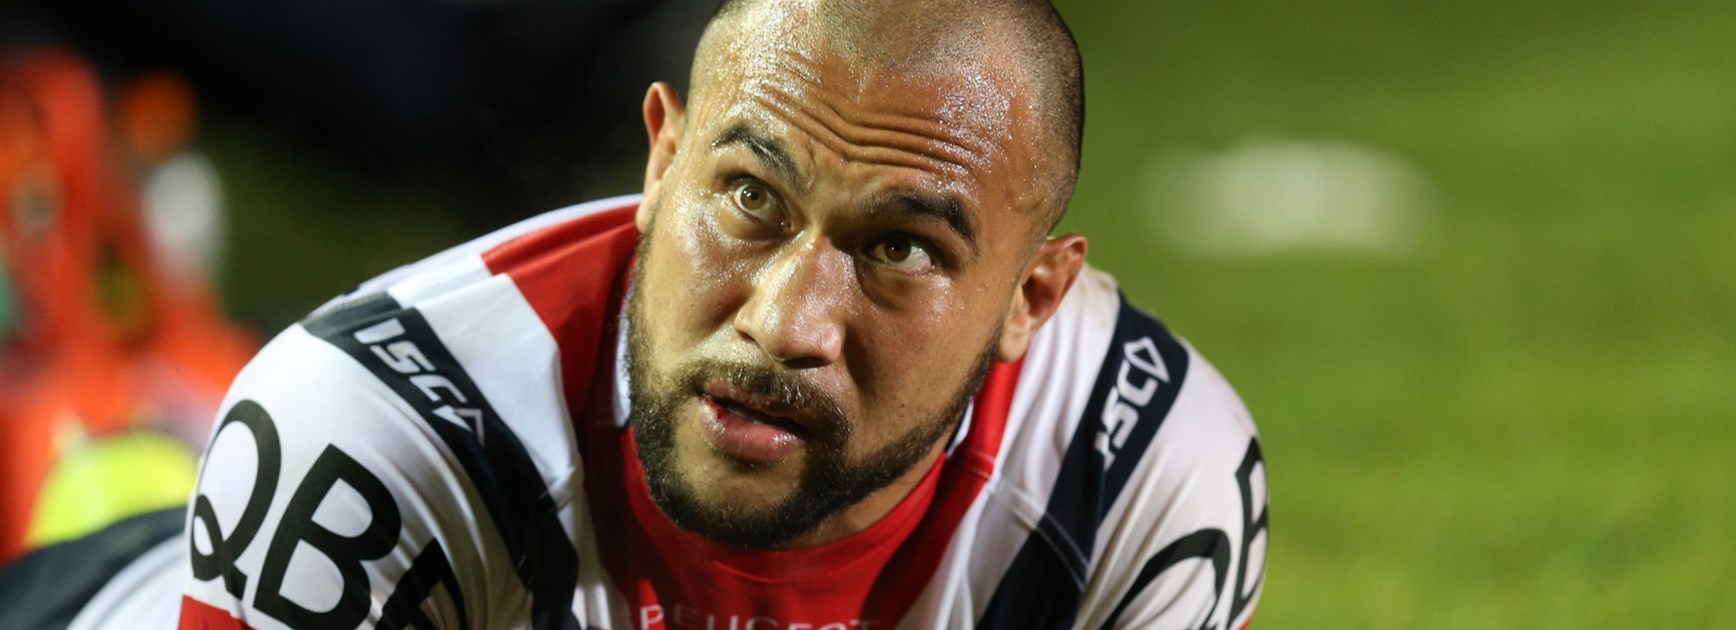 Roosters prop Sam Moa made a successful return from injury in Round 25.